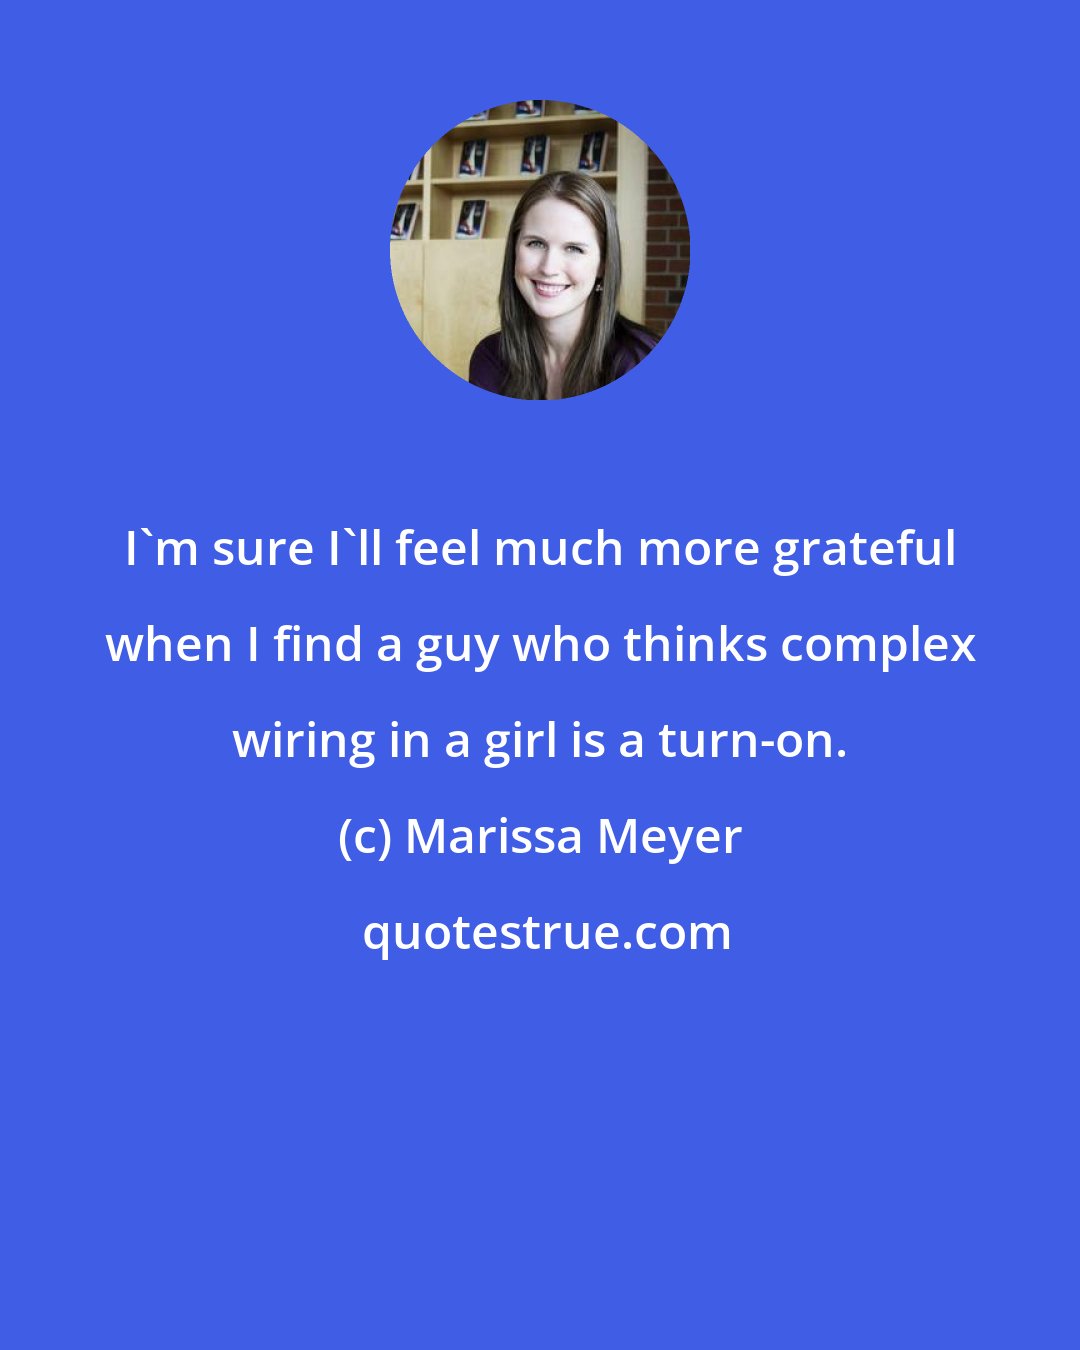 Marissa Meyer: I'm sure I'll feel much more grateful when I find a guy who thinks complex wiring in a girl is a turn-on.